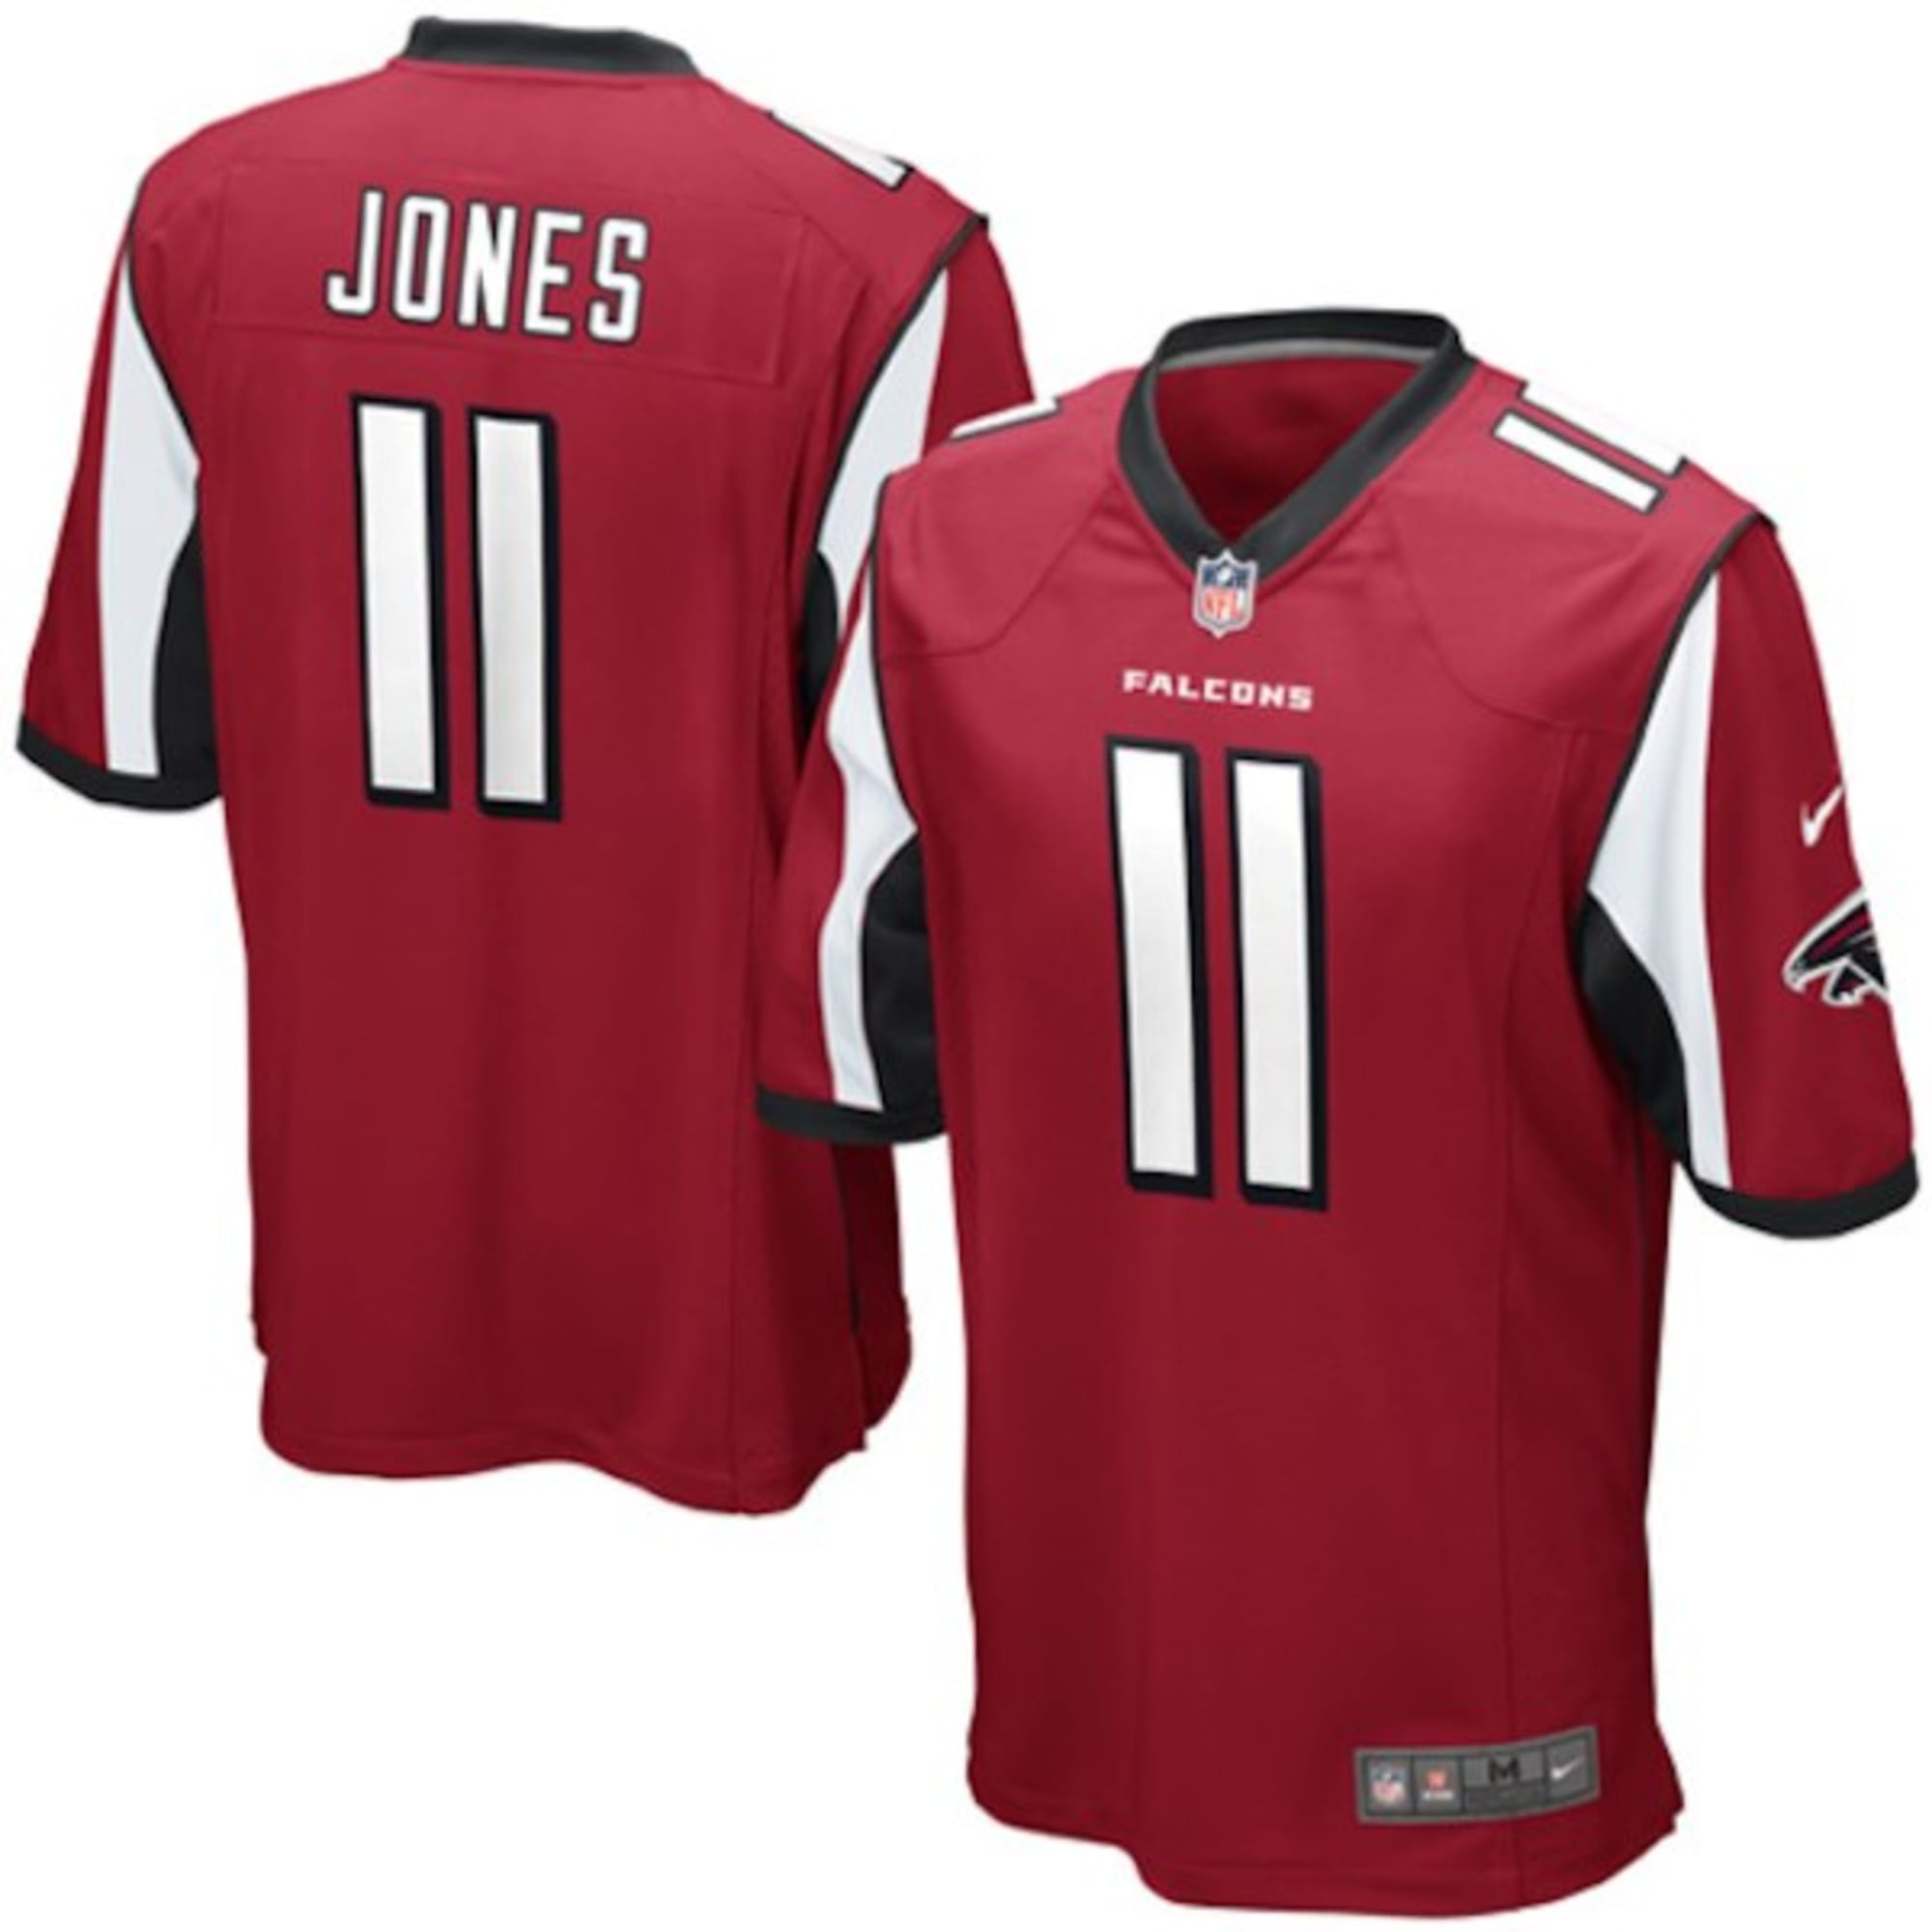 Must-have Atlanta Falcons items for the 